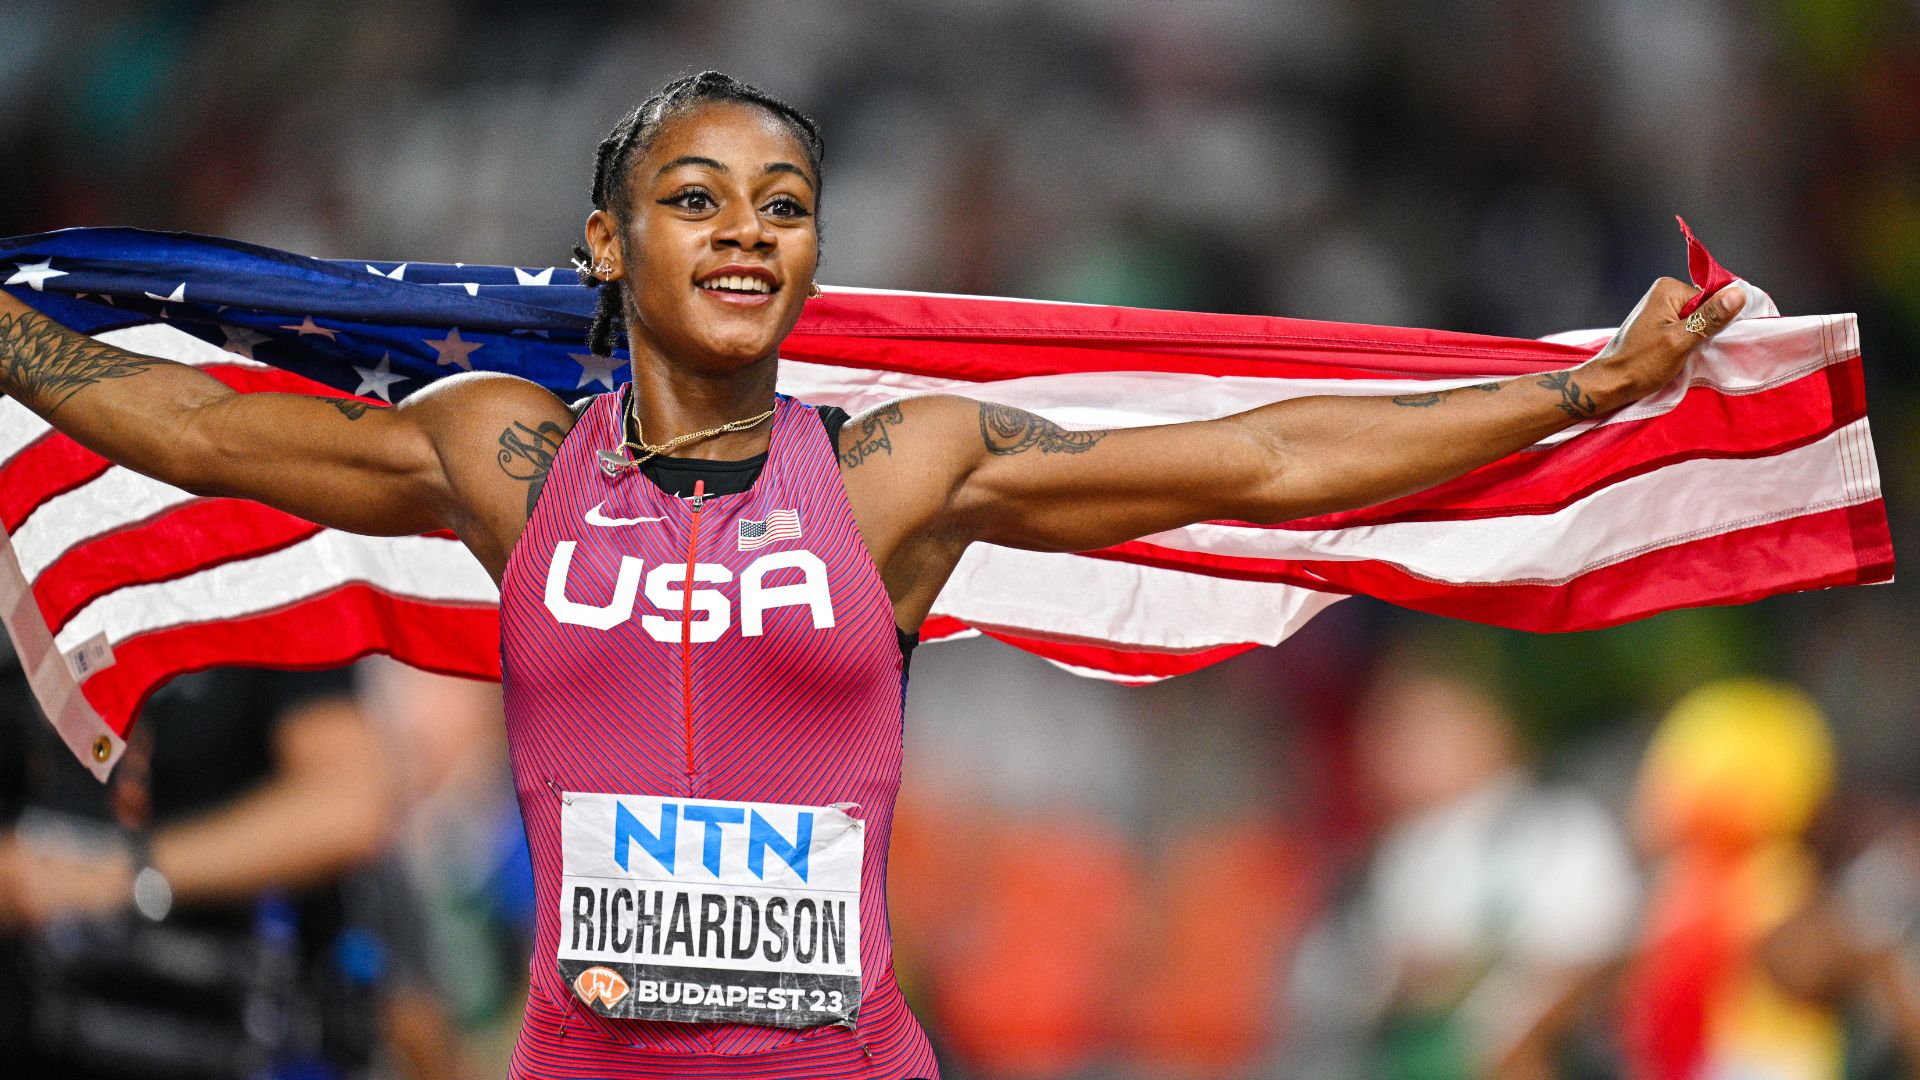 Queer athlete ShaCarri Richardson is worlds fastest woman